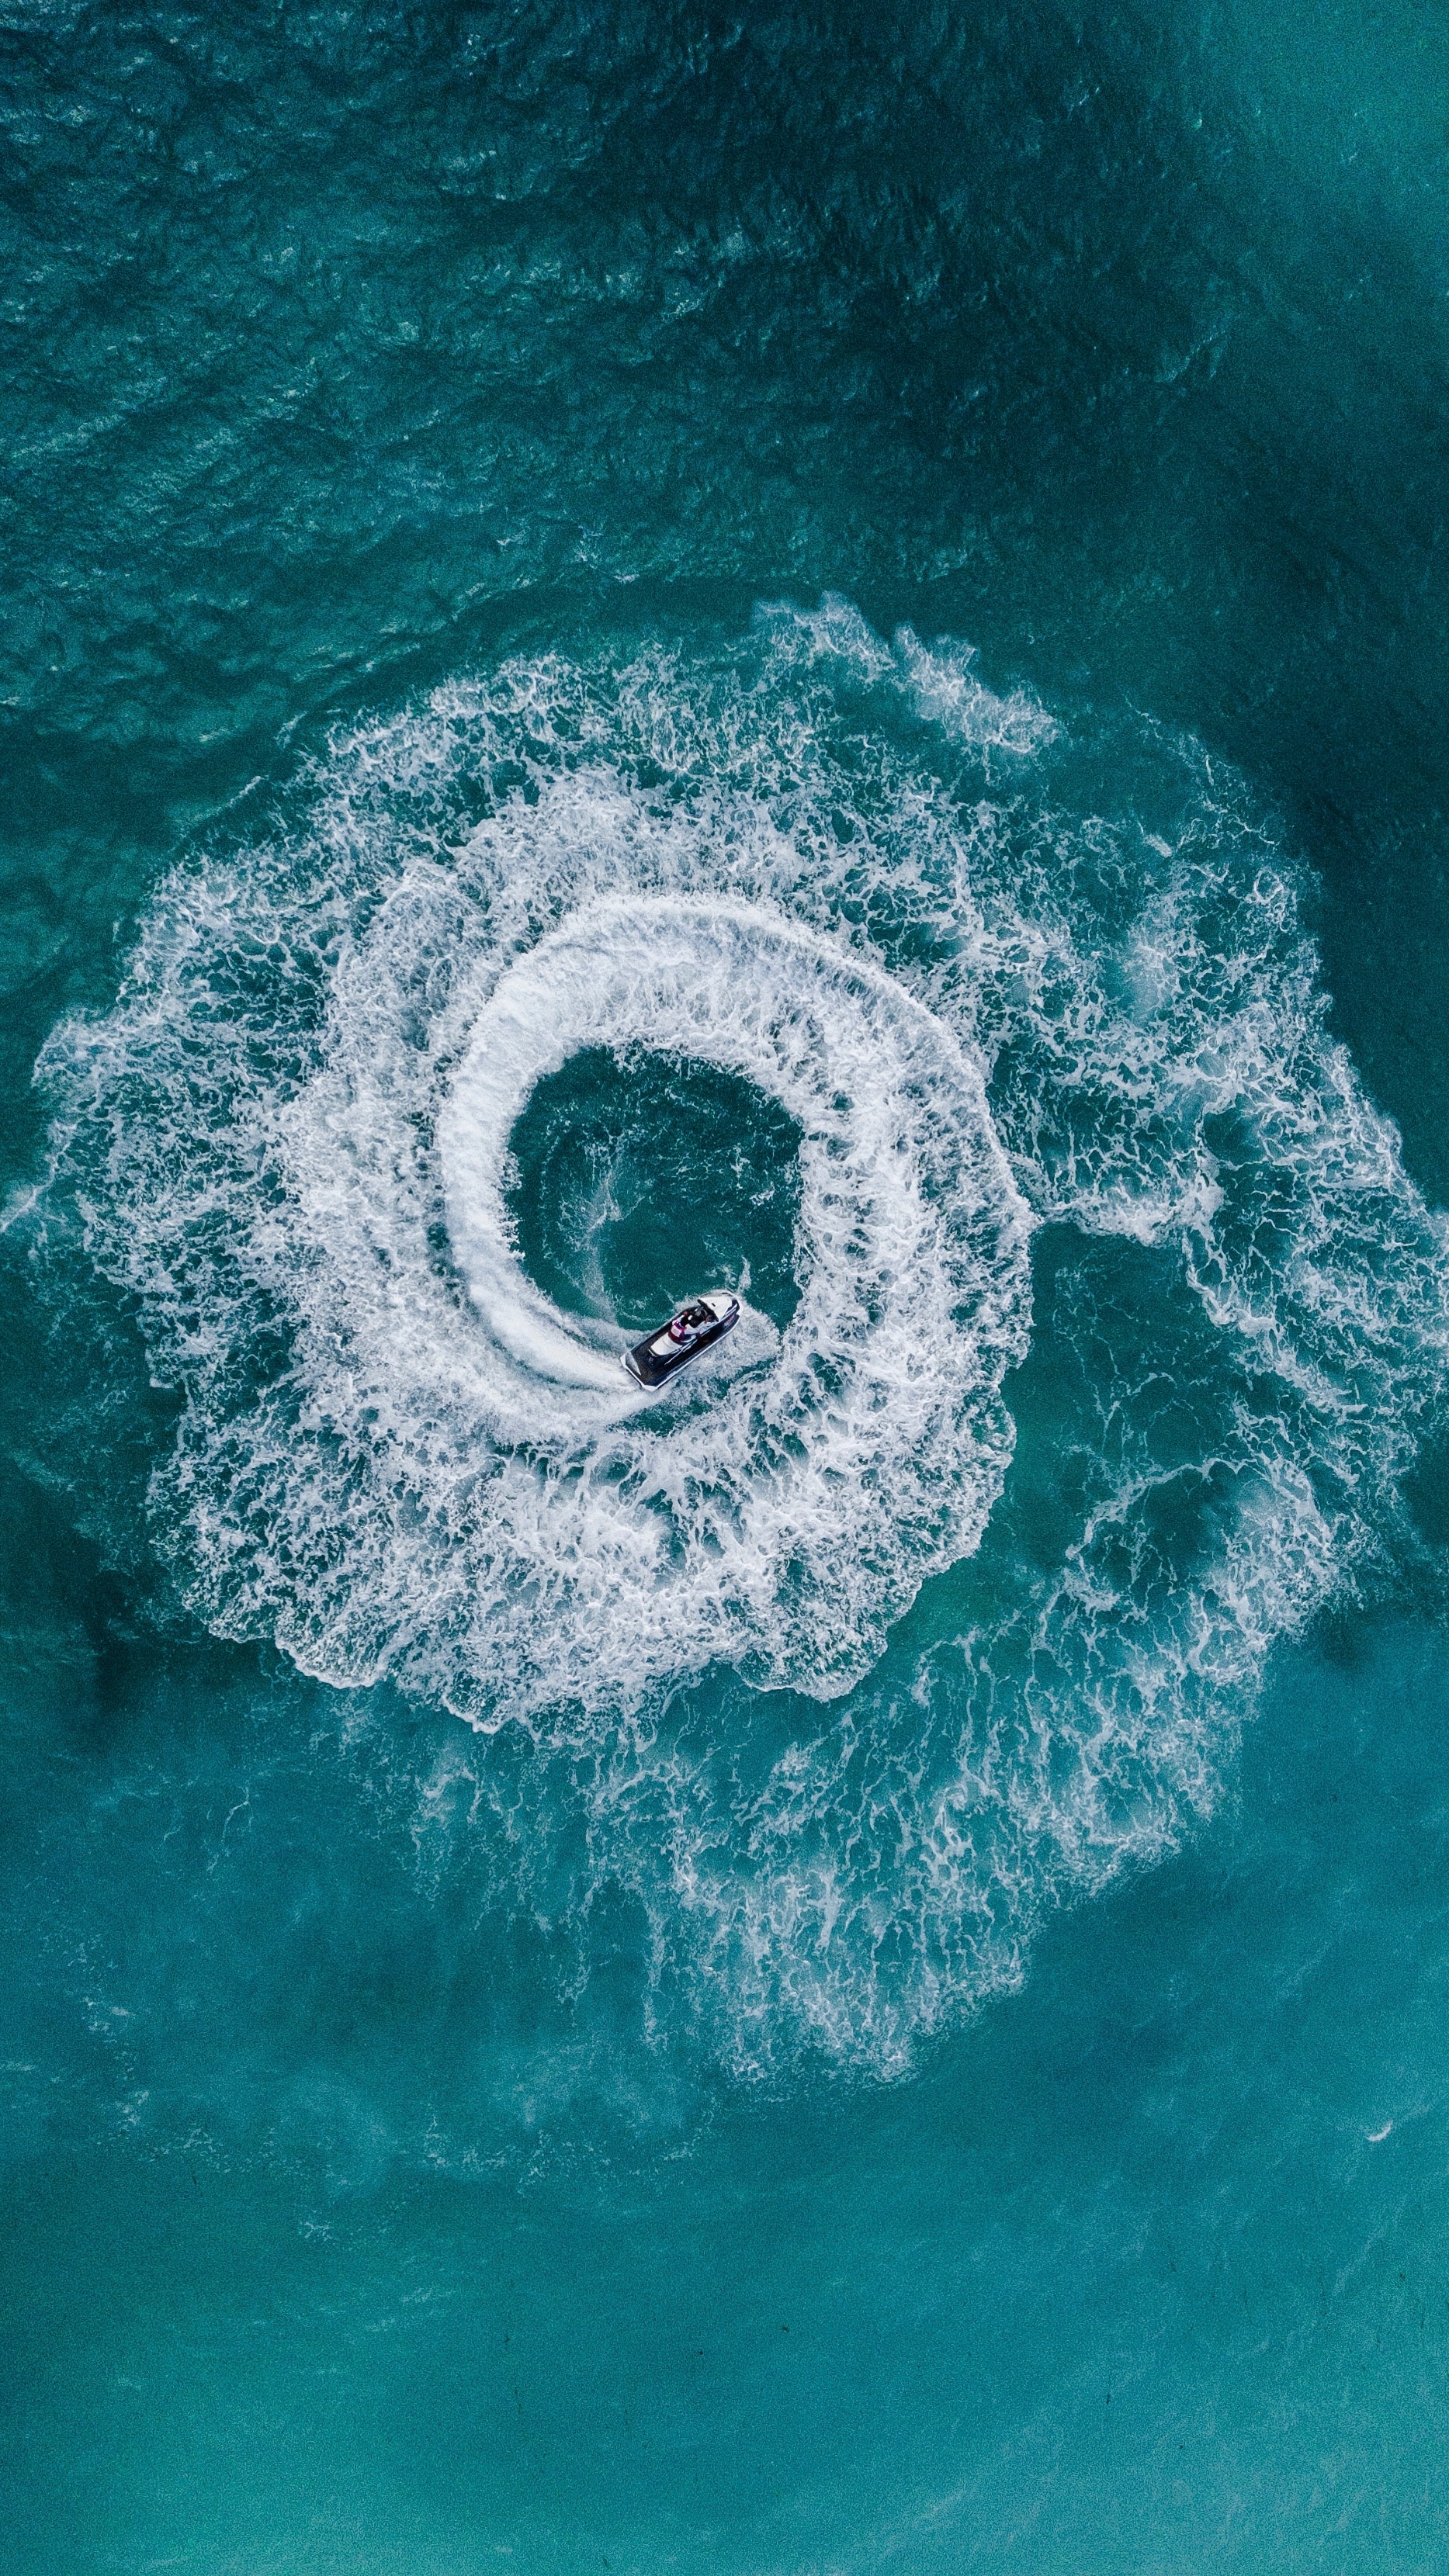 miscellaneous, sea, jet ski, water, waves, view from above, miscellanea, hydrocycle cellphone